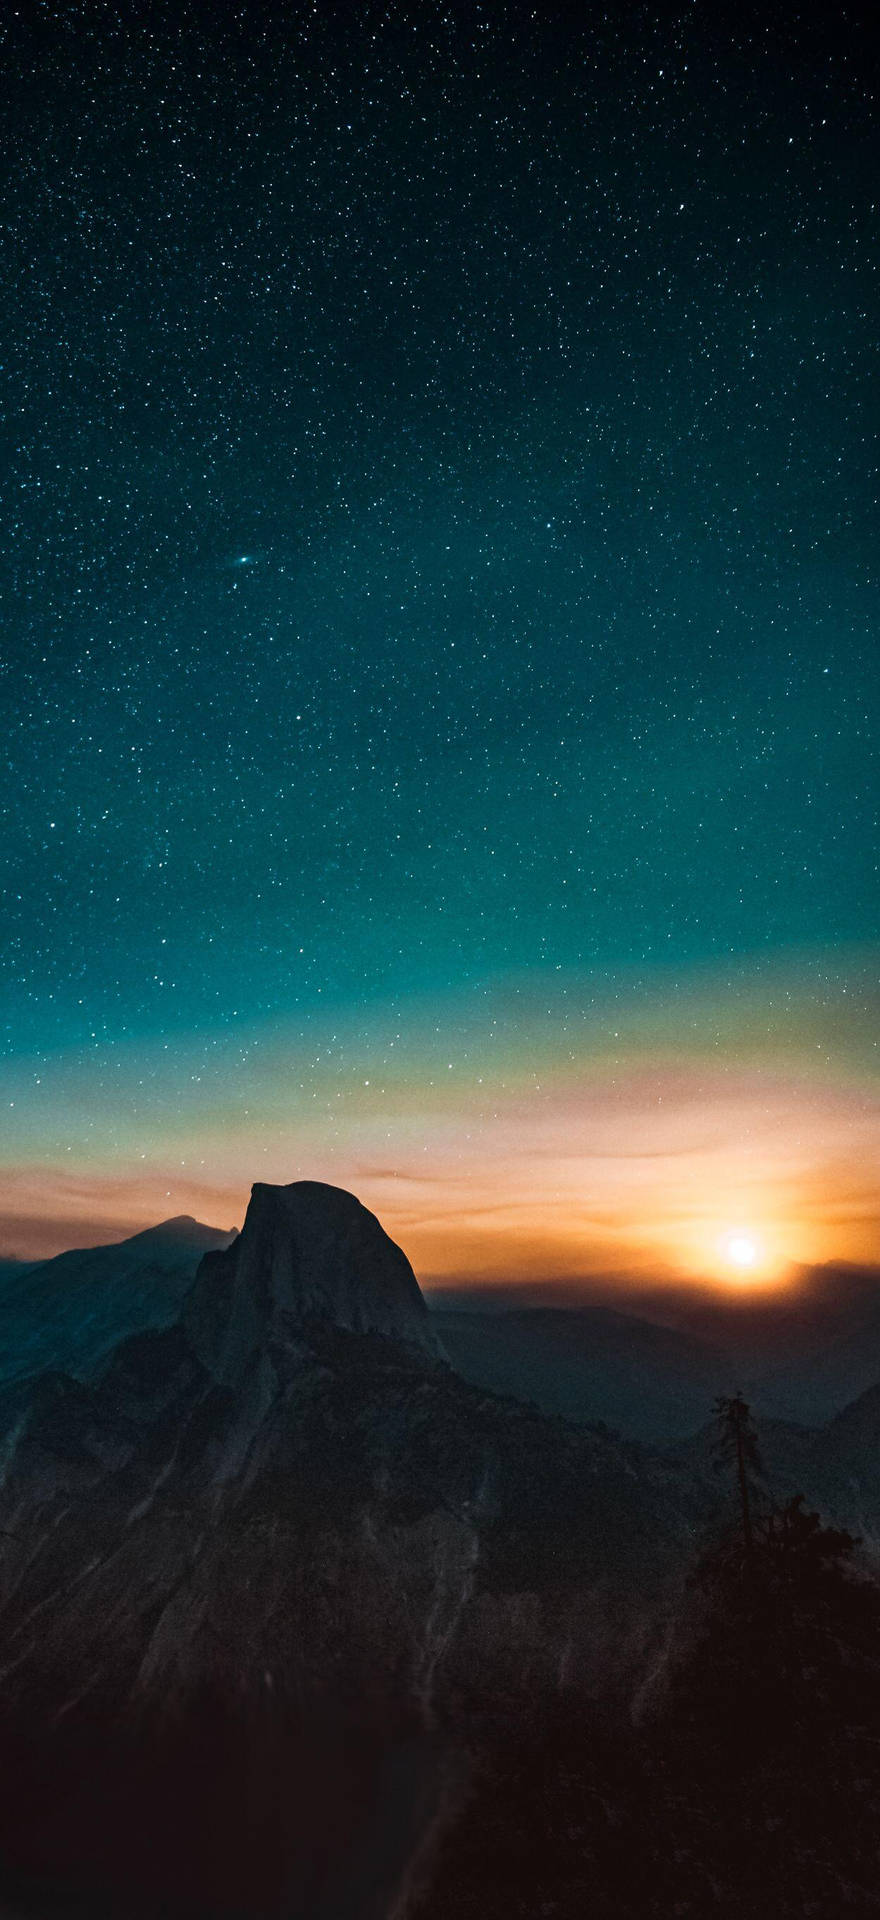 Cool Iphone Xs Max Starry Mountain